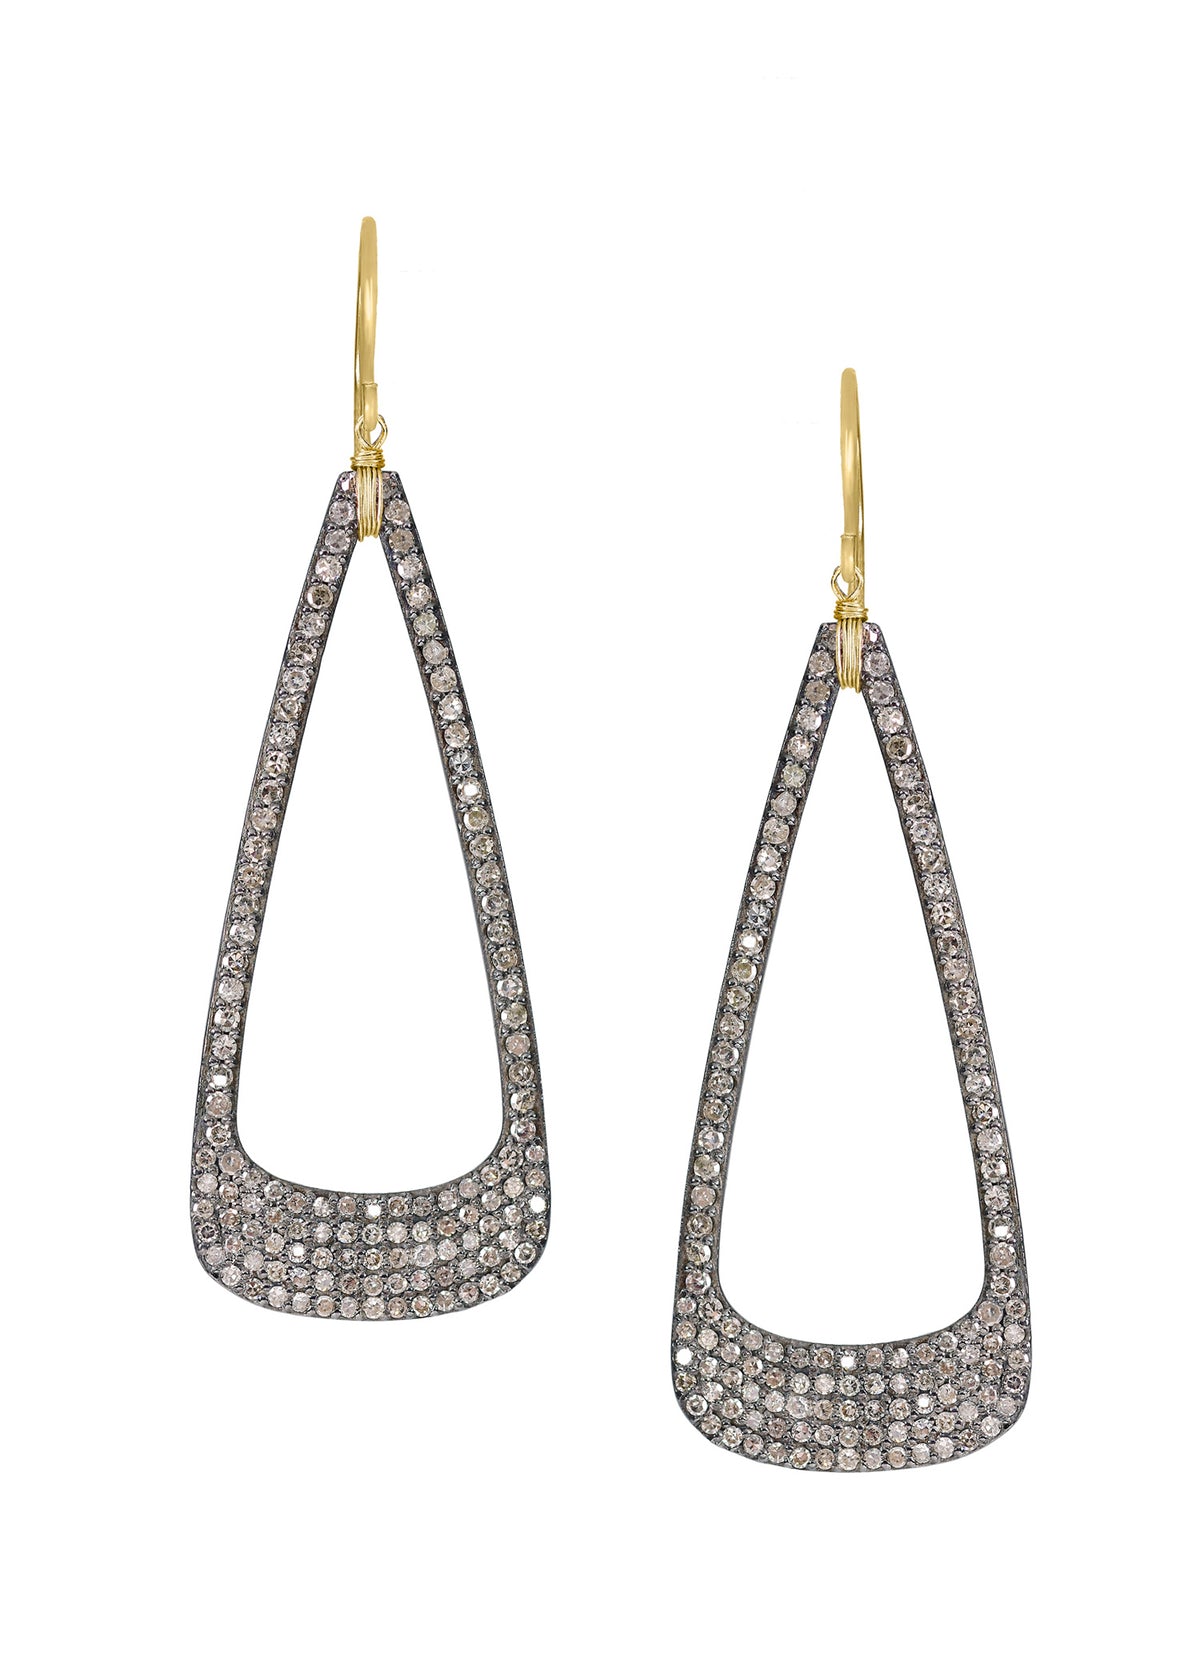 Diamond 14k gold Sterling silver Mixed metal Special order only Earrings measure 2-3/8&quot; in length (including the ear wires) and 13/16&quot; in width at the widest point Handmade in our Los Angeles studio